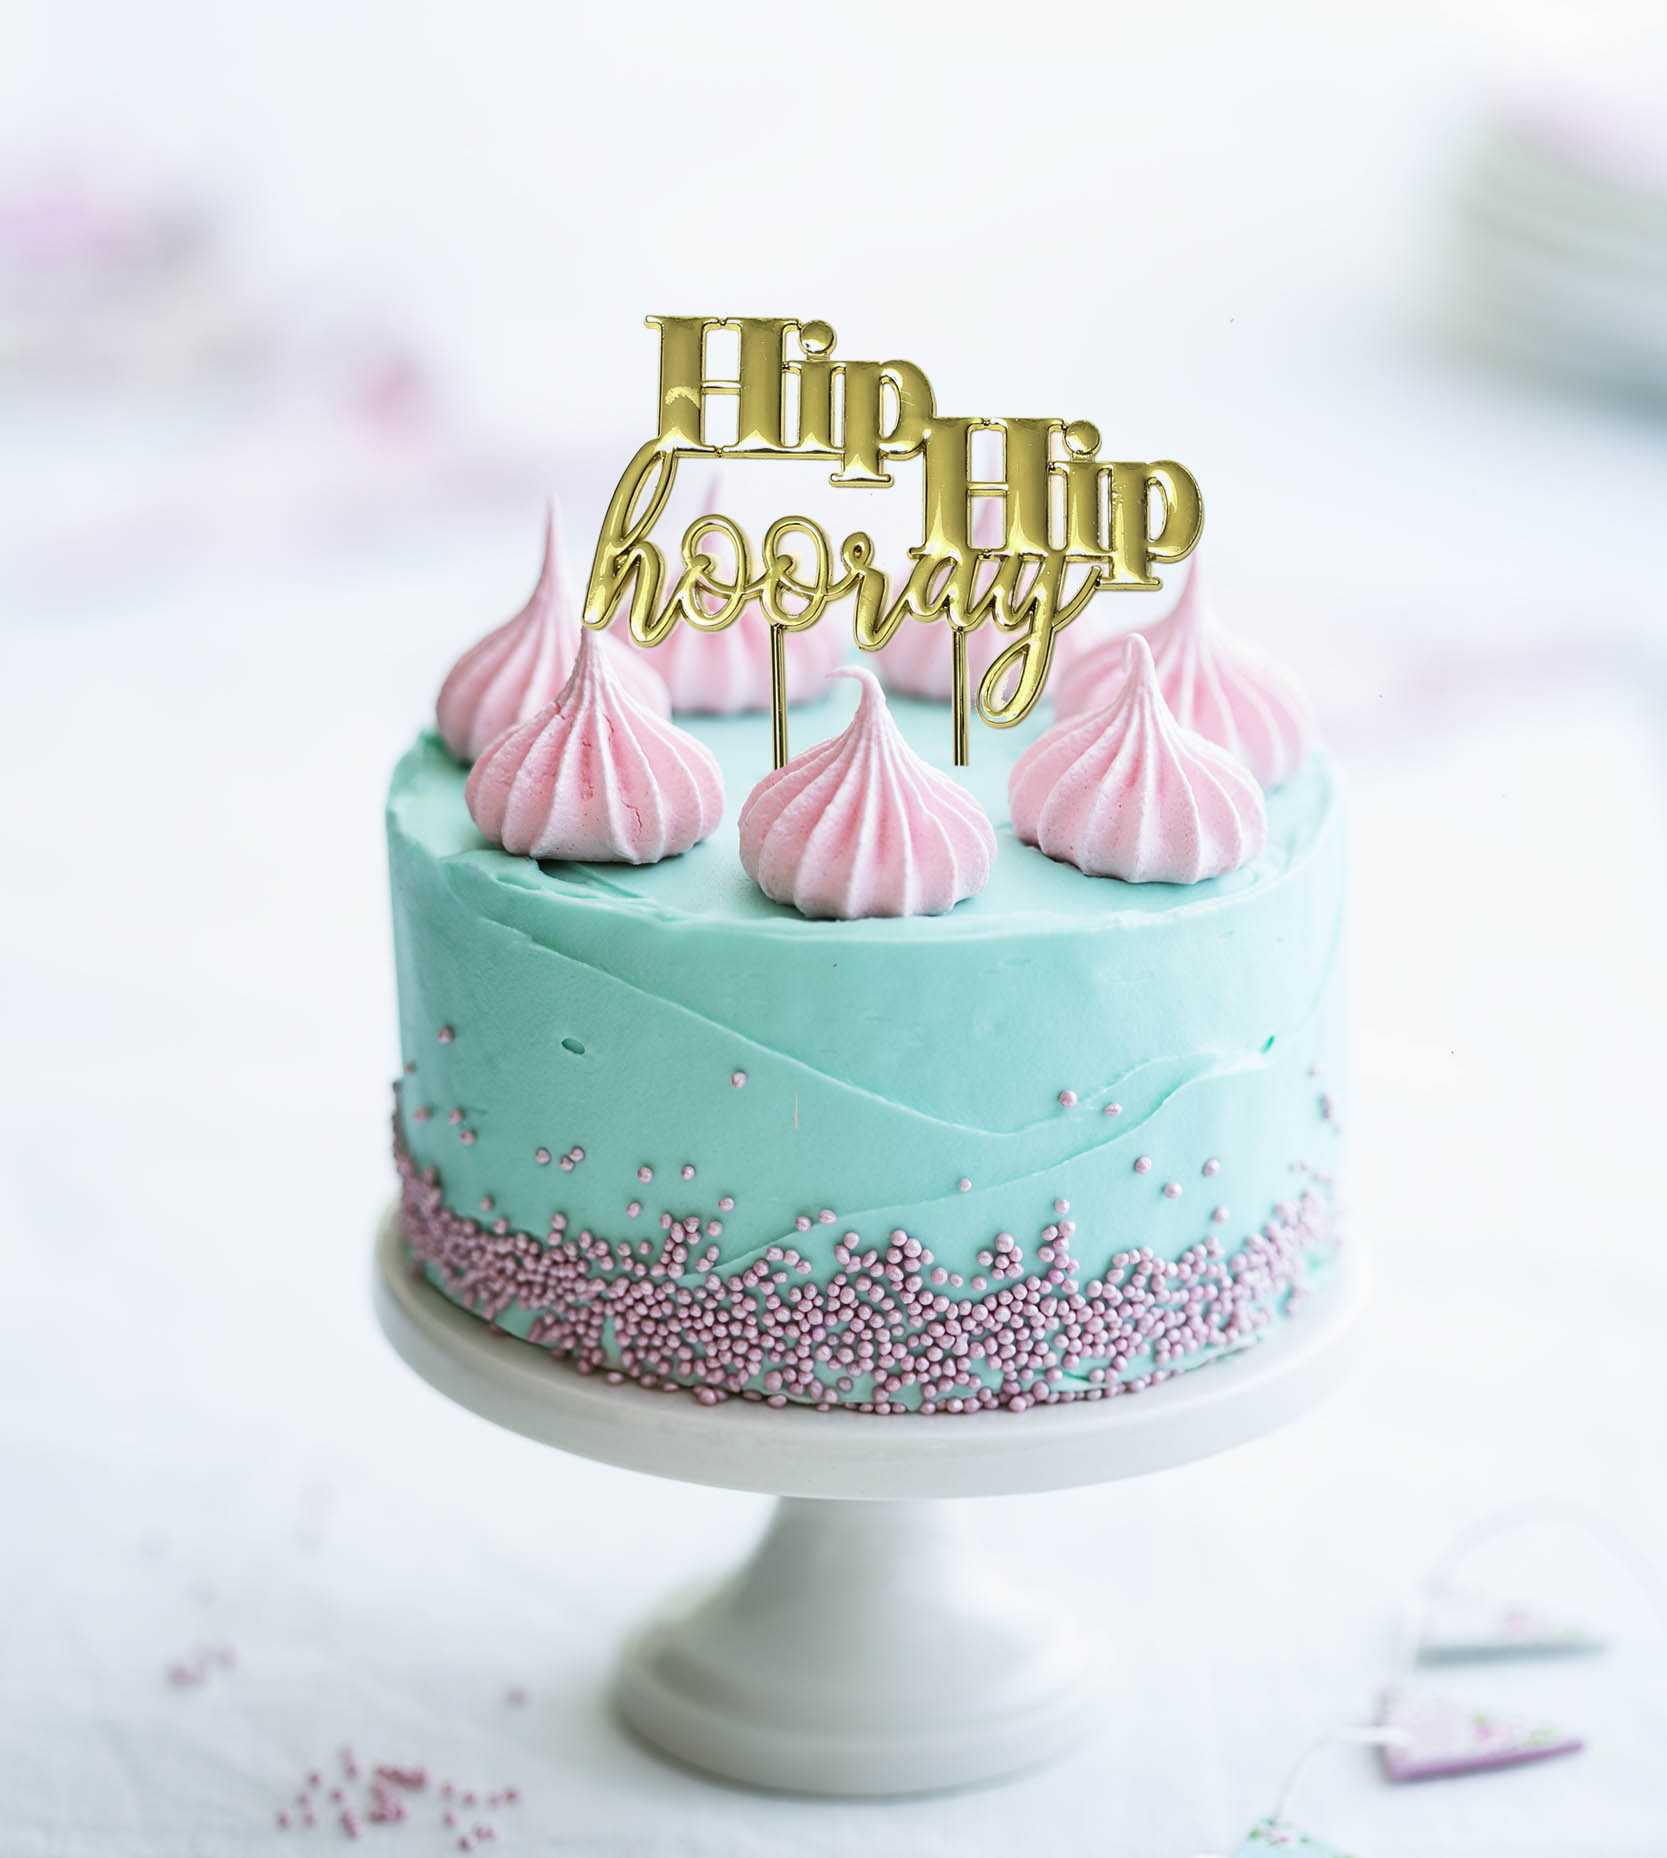 GOLD Plated Cake Topper - HIP HIP HOORAY